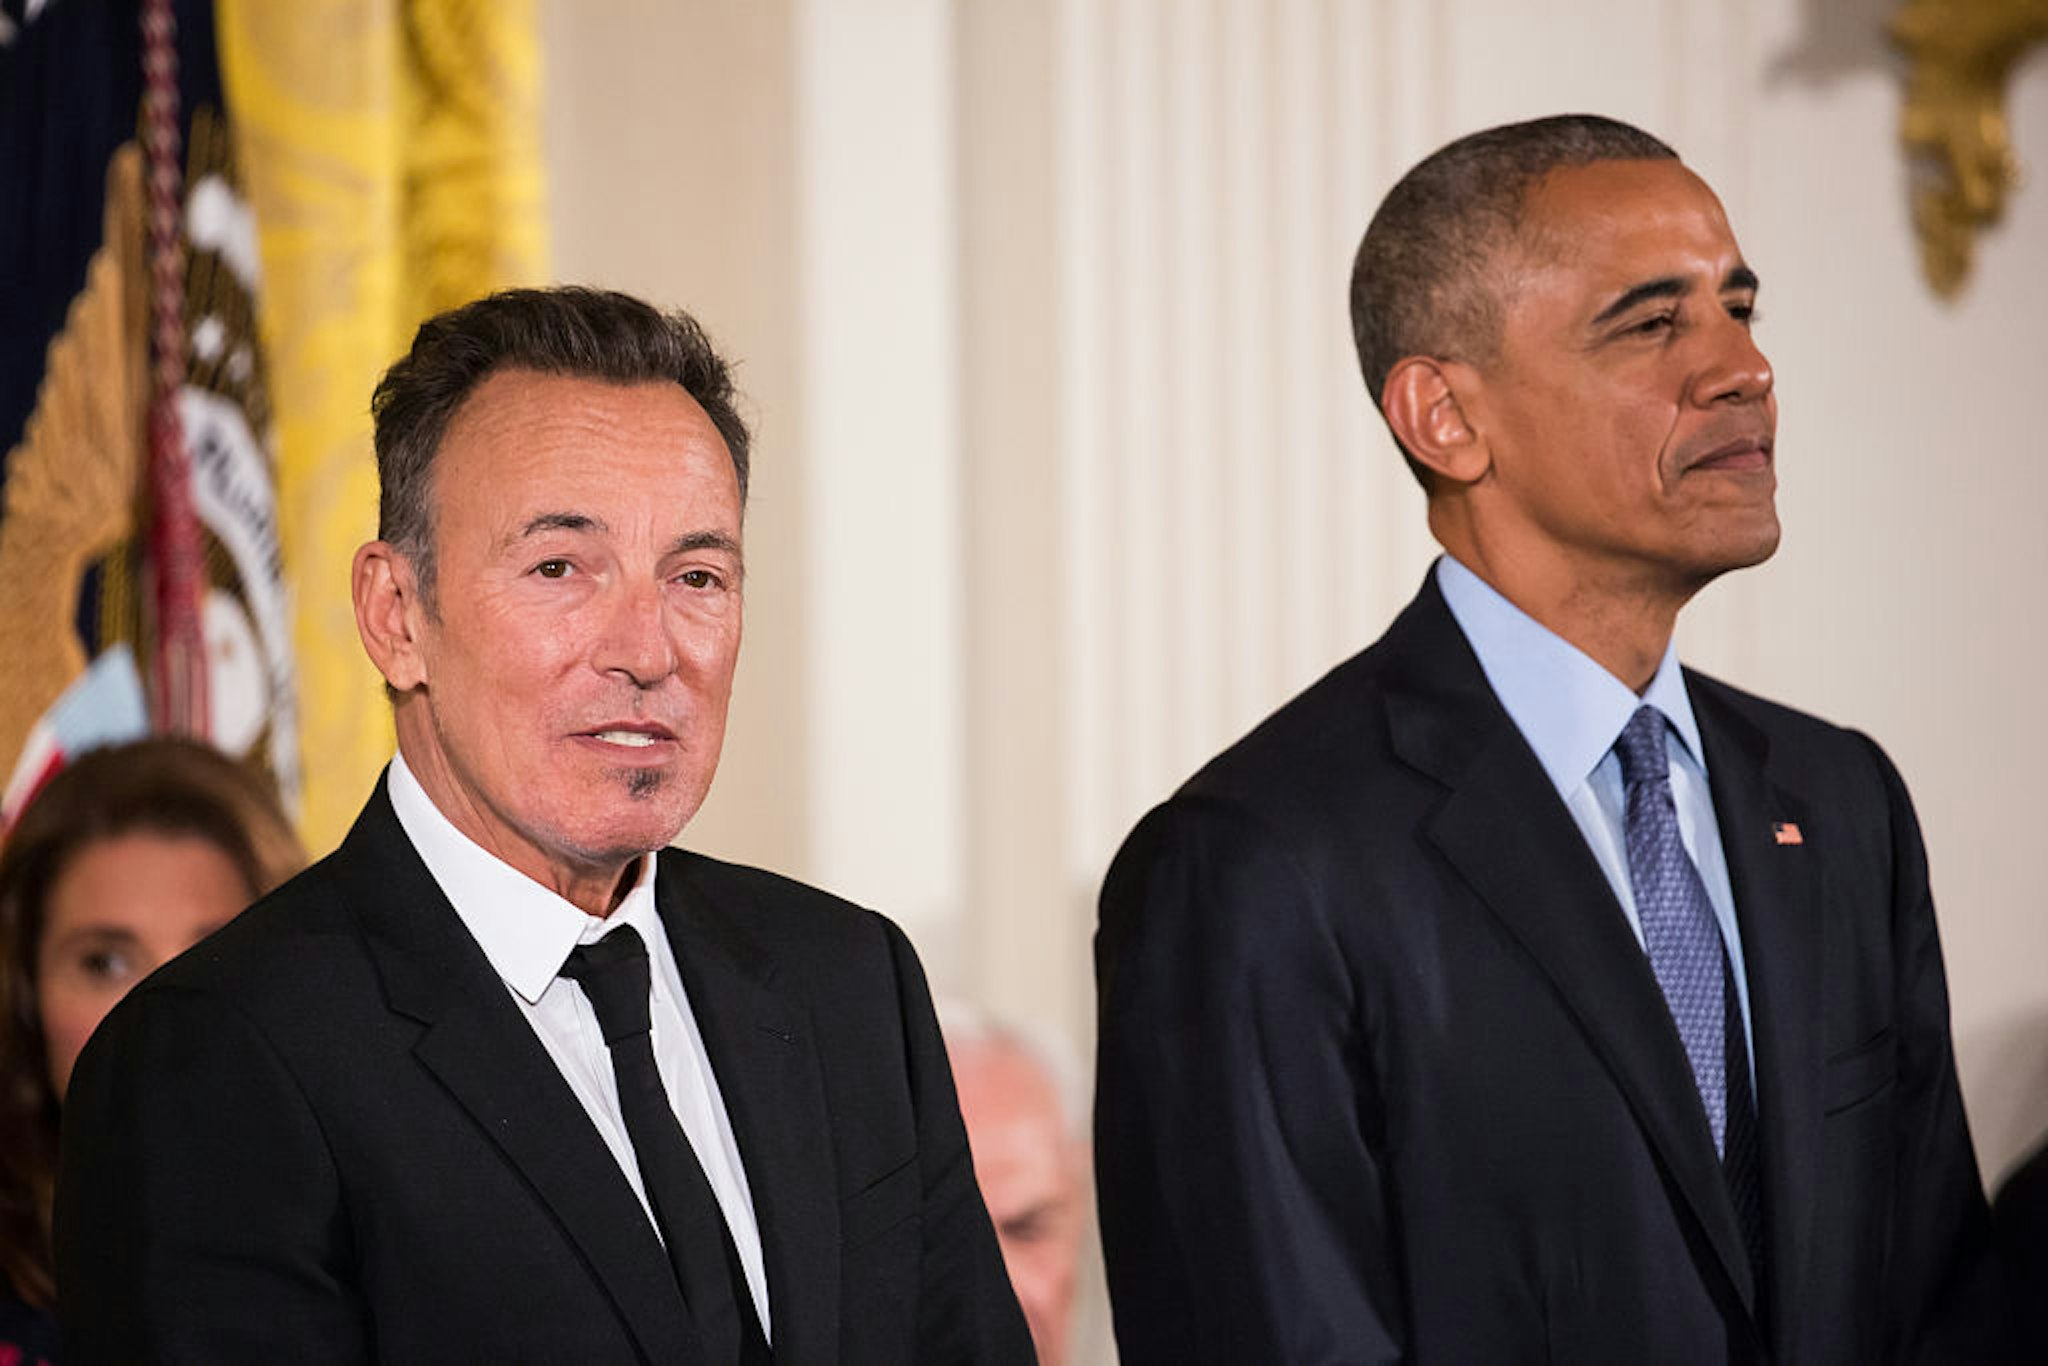 President Barack Obama awarded the Presidential Medal of Freedom to singer-songwriter Bruce Springsteen. (Photo by Cheriss May/NurPhoto via Getty Images)